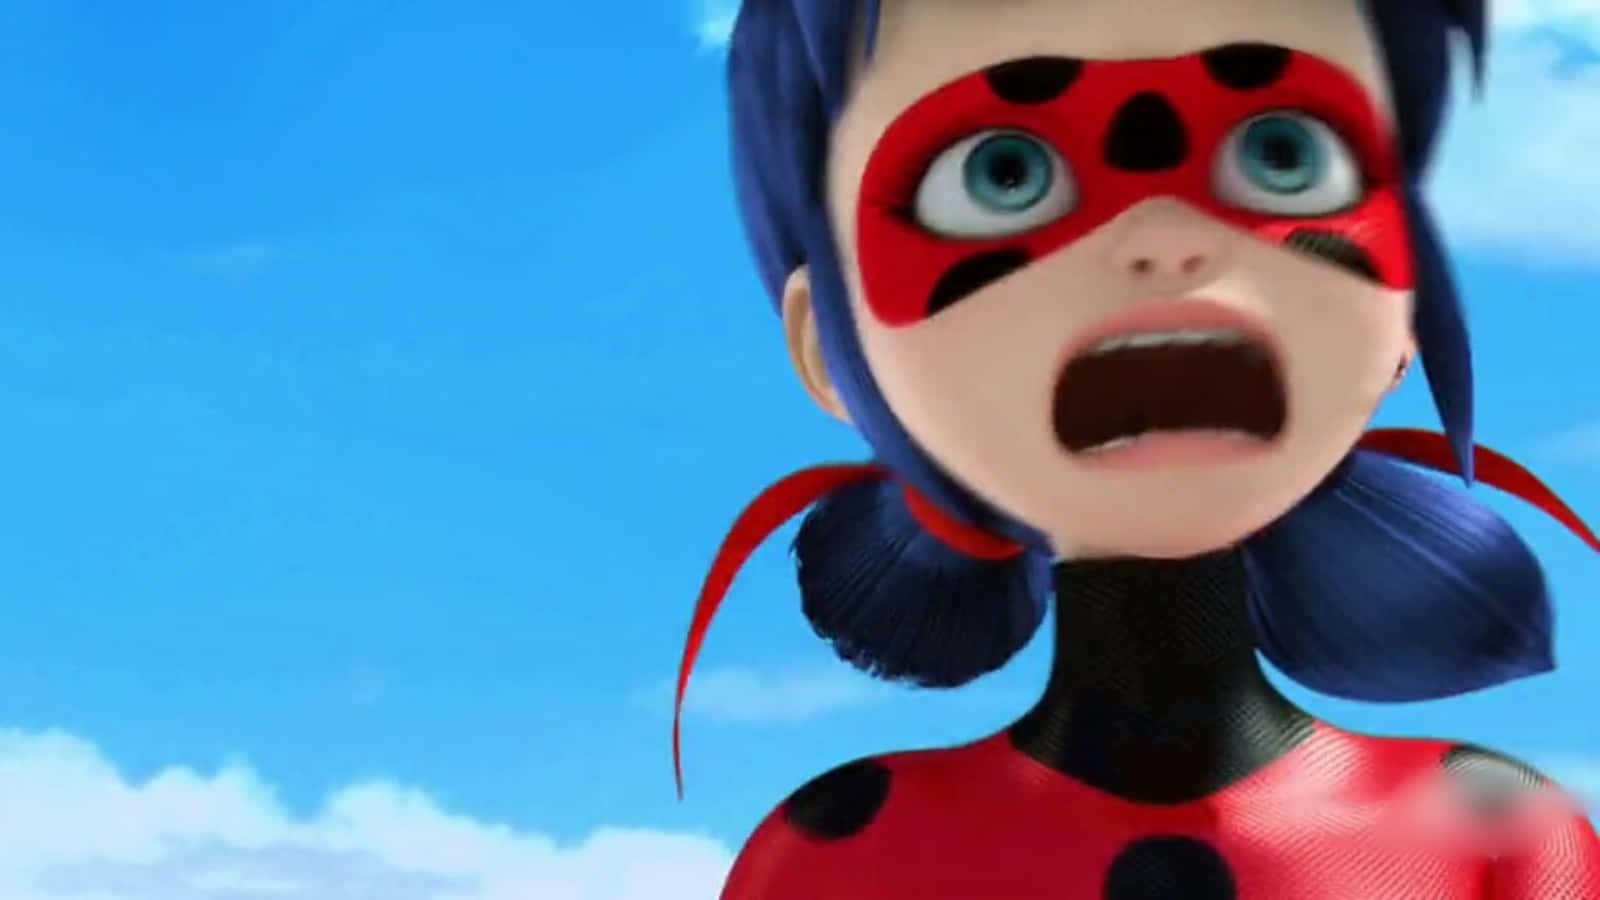 In the blink of an eye, Ladybug is granted a miraculous power to fight evil!